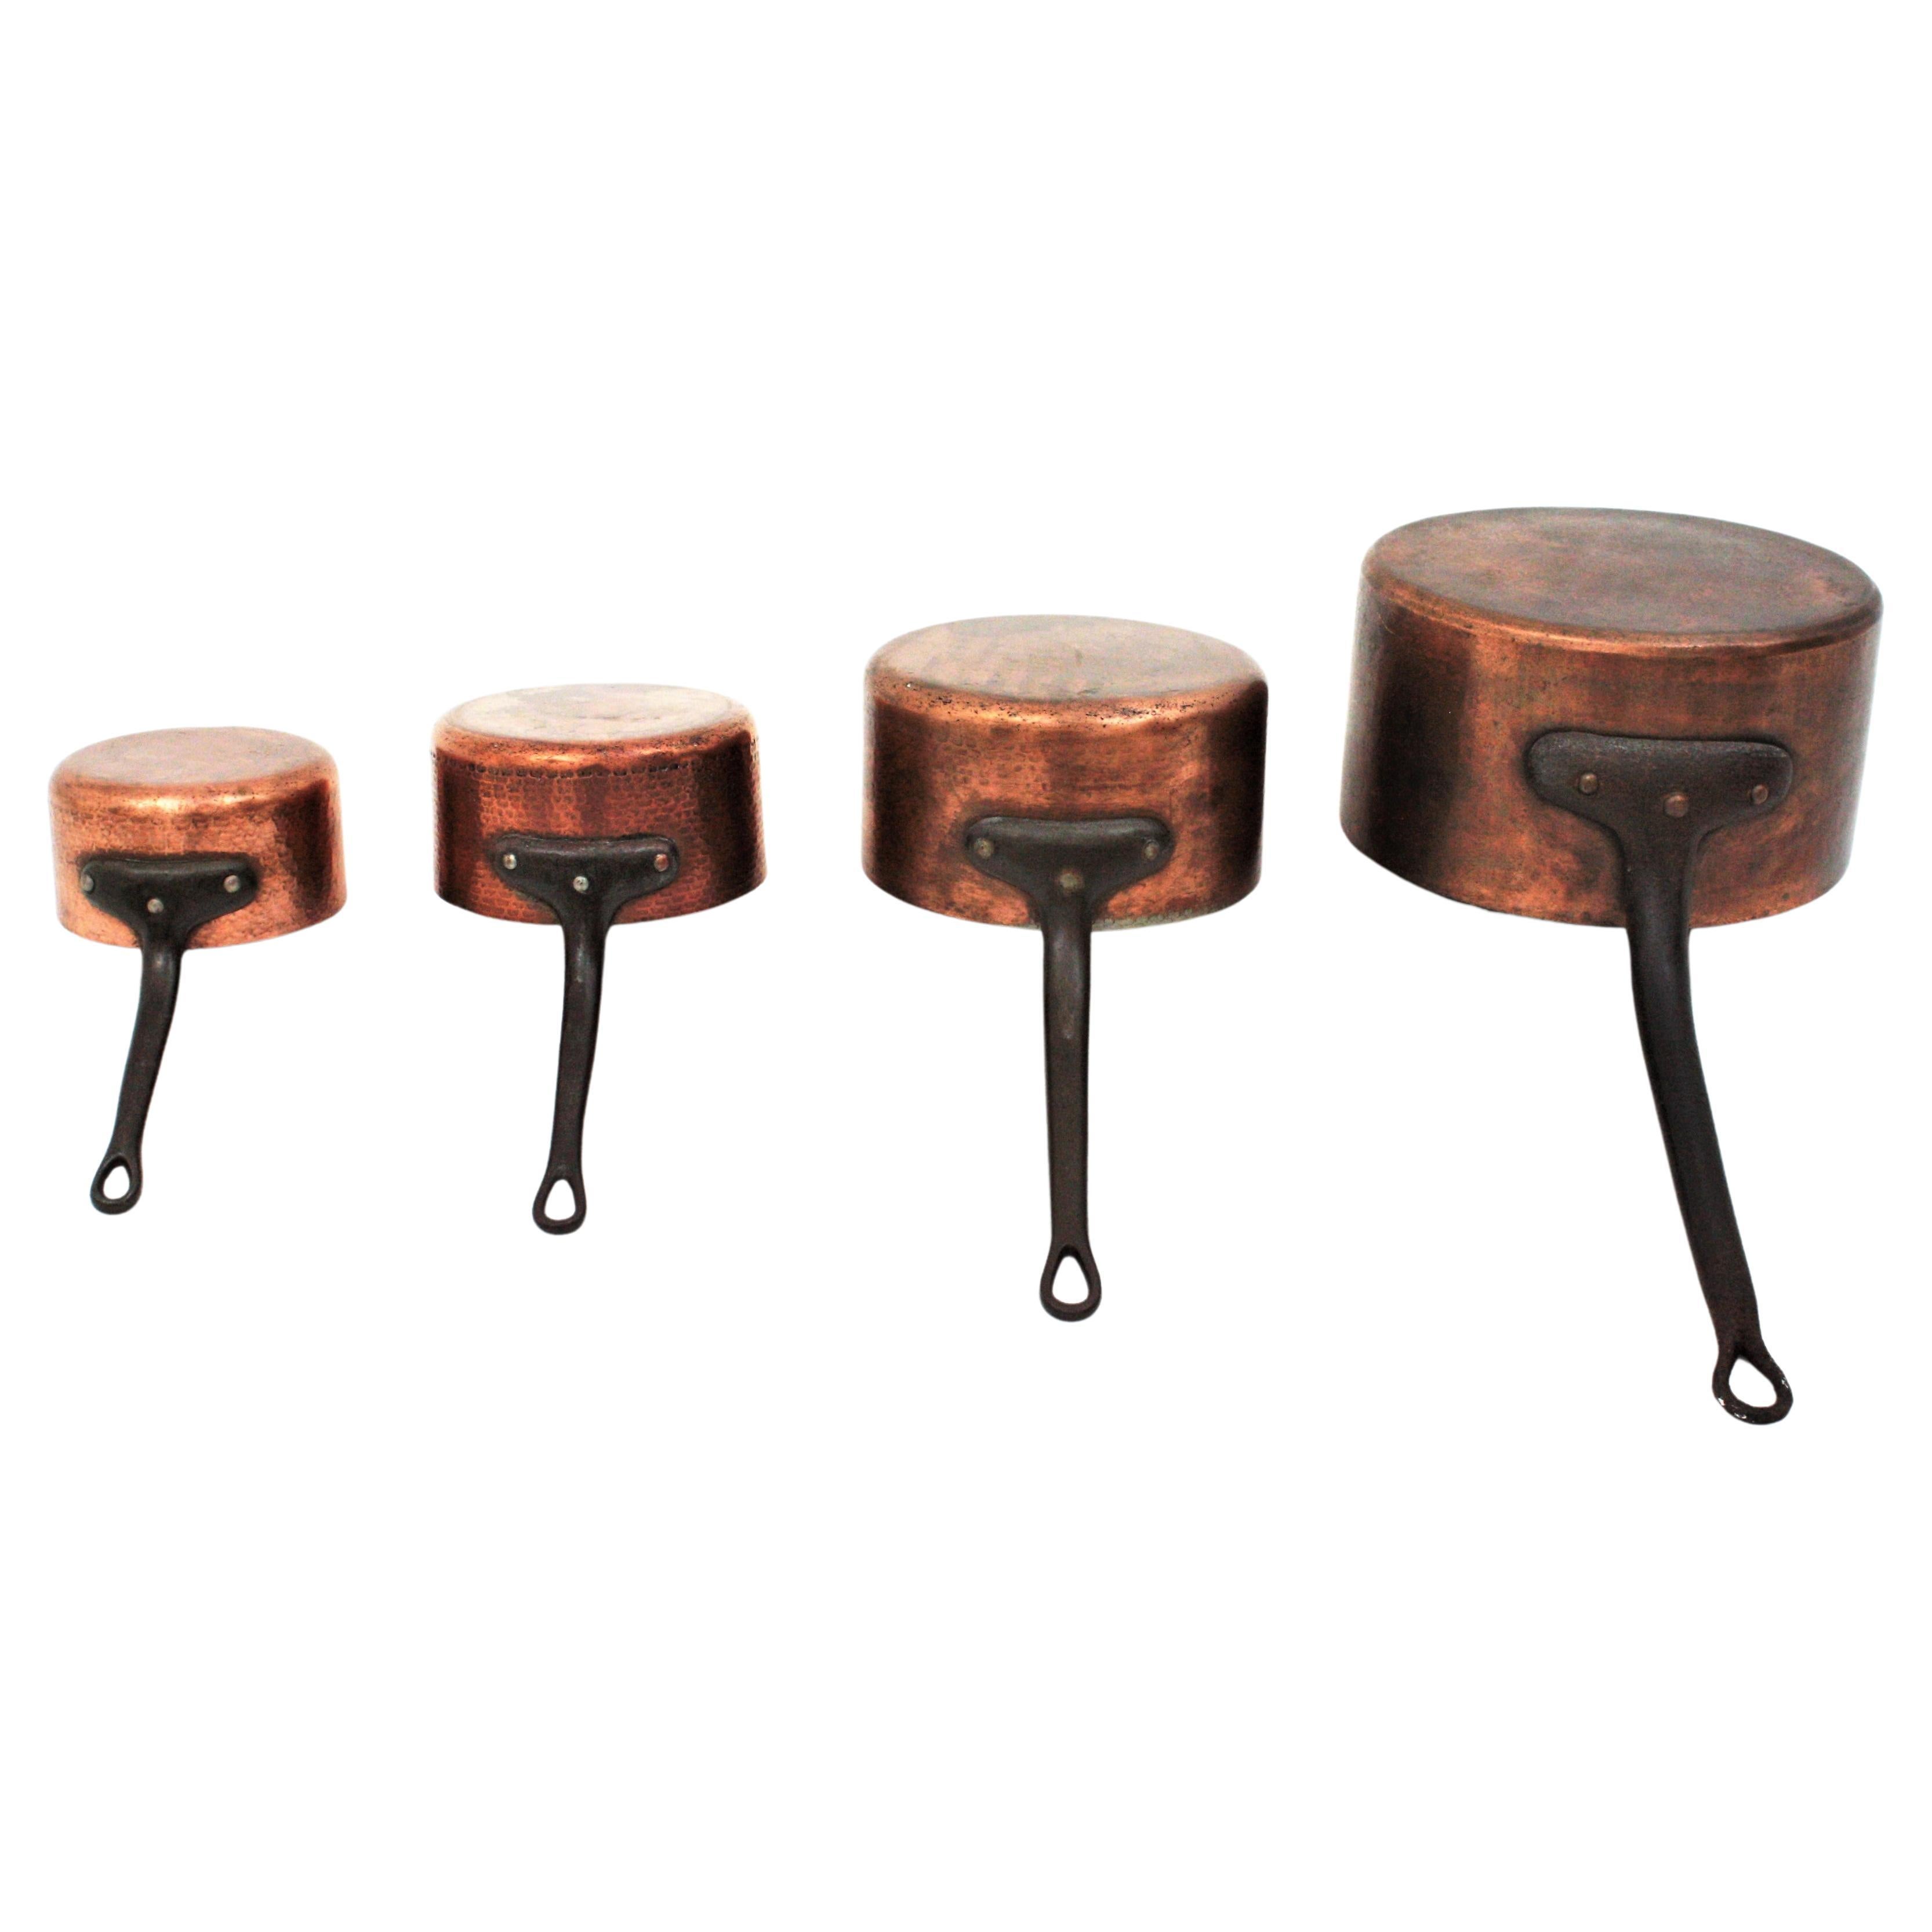 Great collection of antique french graduated hand-forged copper and cast iron cook pans - pots. France, late 19th century to 1930s.
The copper pots have cast iron handles. 
This set of four matching pots have been restored without polishing the